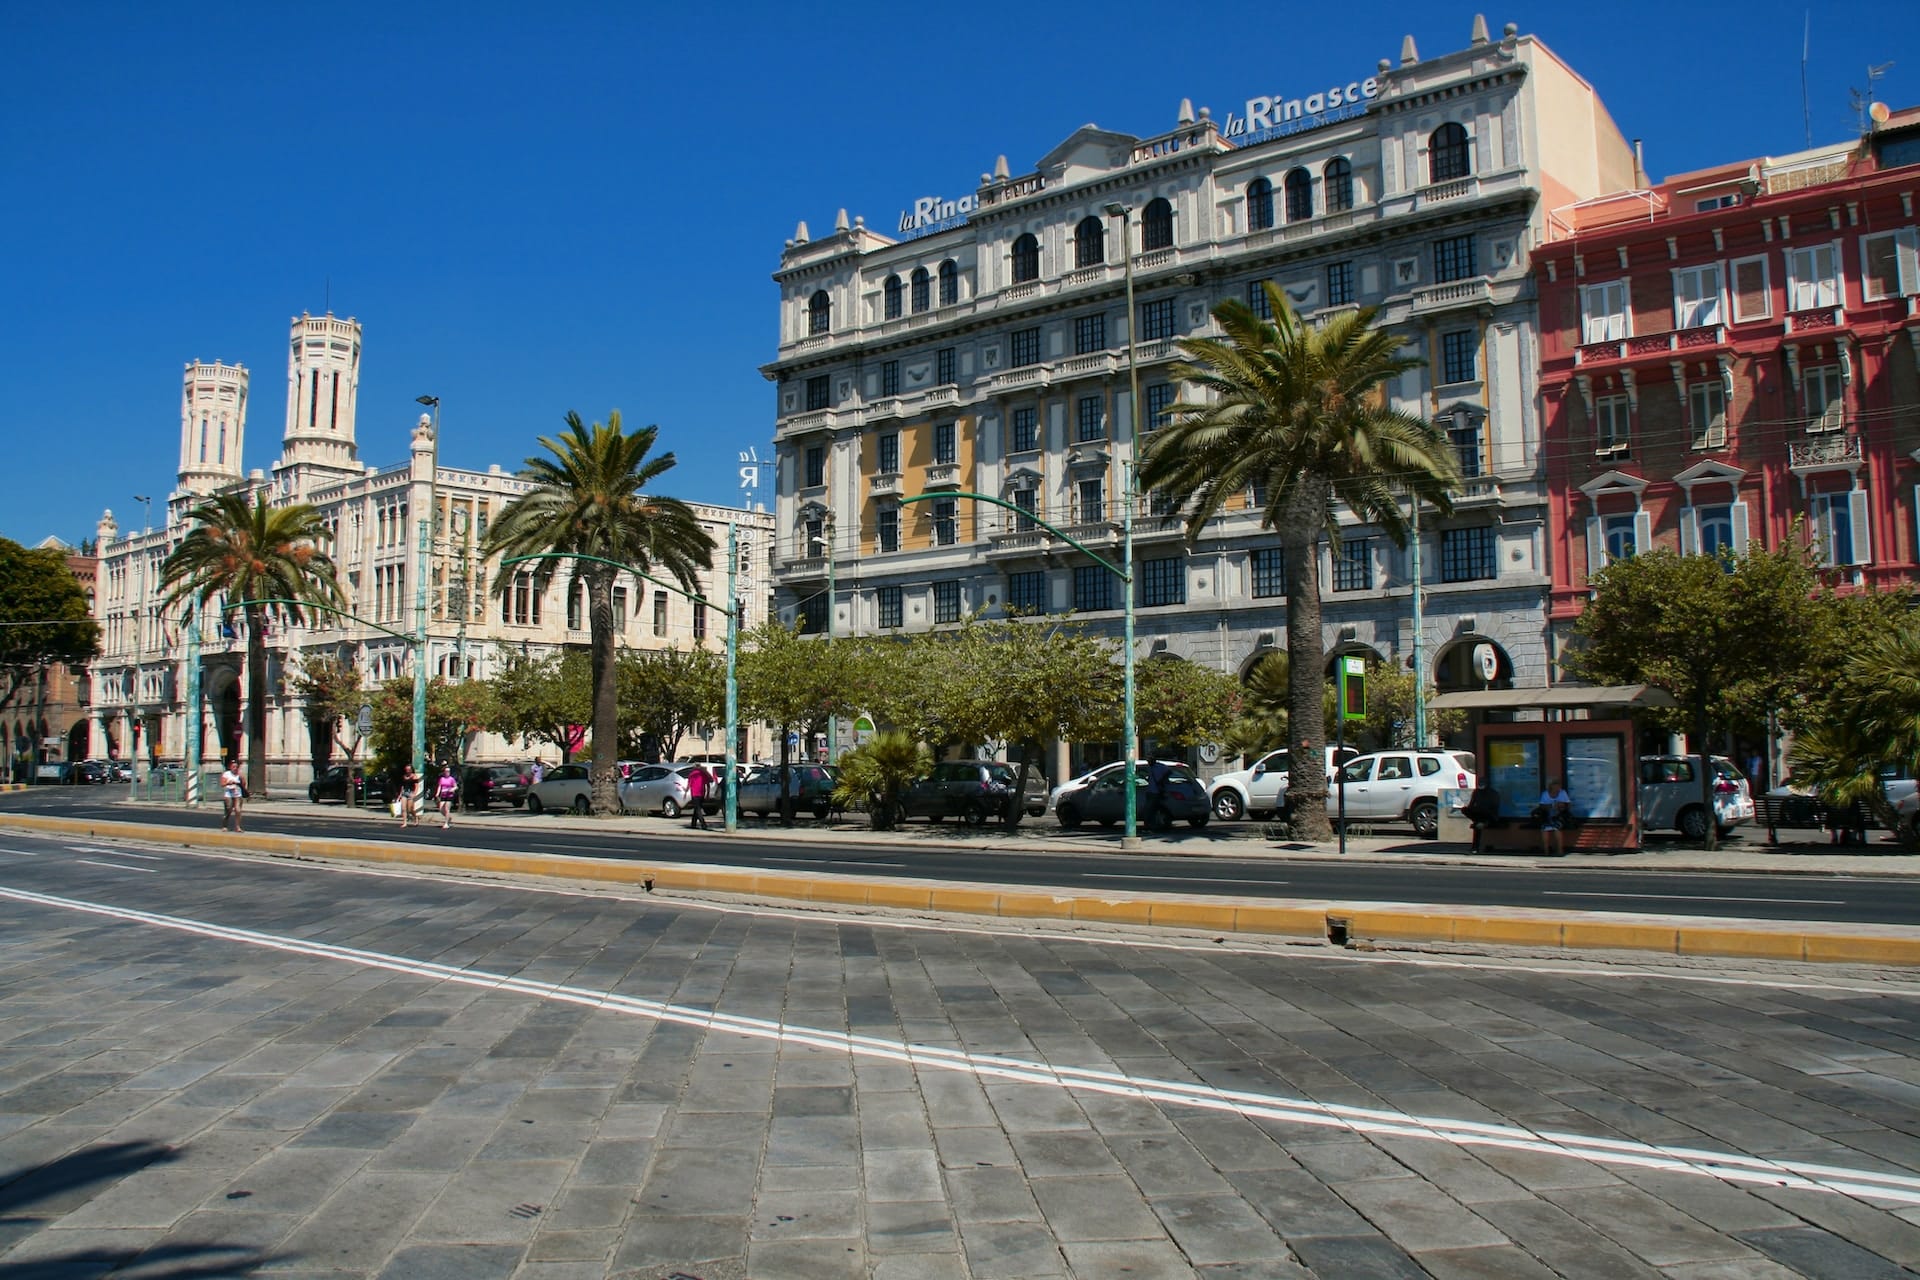 Marina is a great spot for shopping, dining, and nightlife within walking distance to many of Cagliari's main attractions